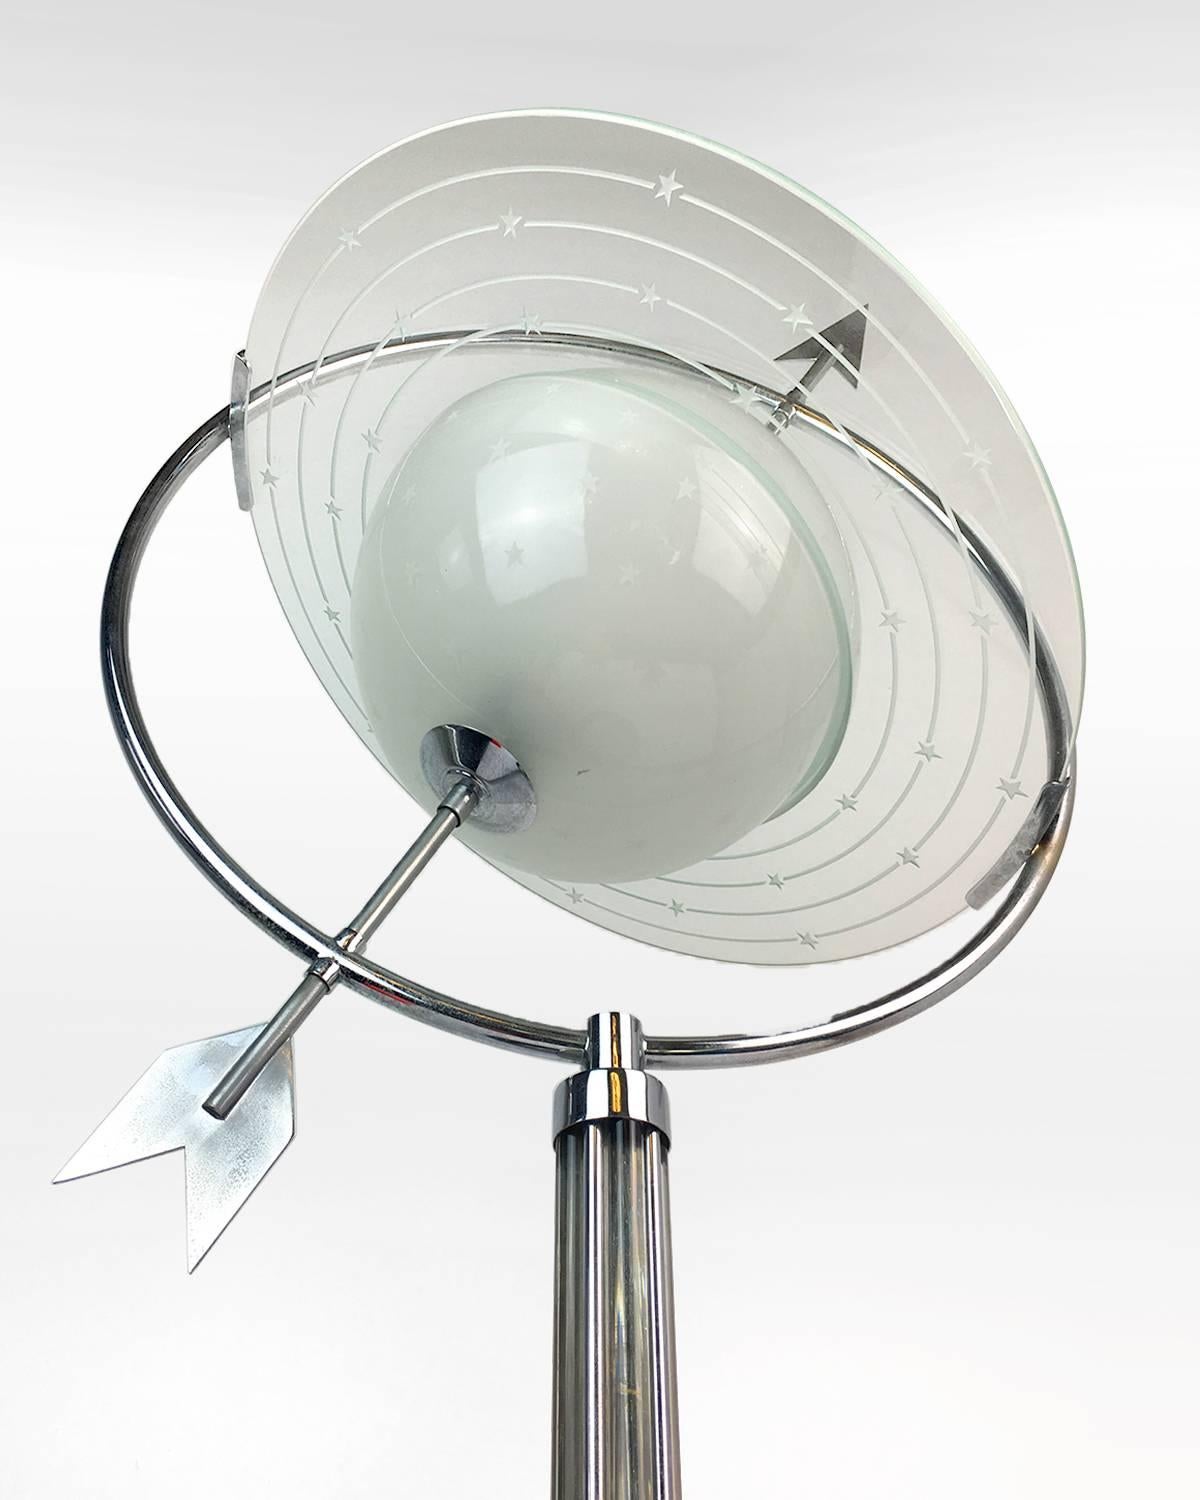 Frosted glass lamp form of the Saturn with stars pattern and metal arrow.